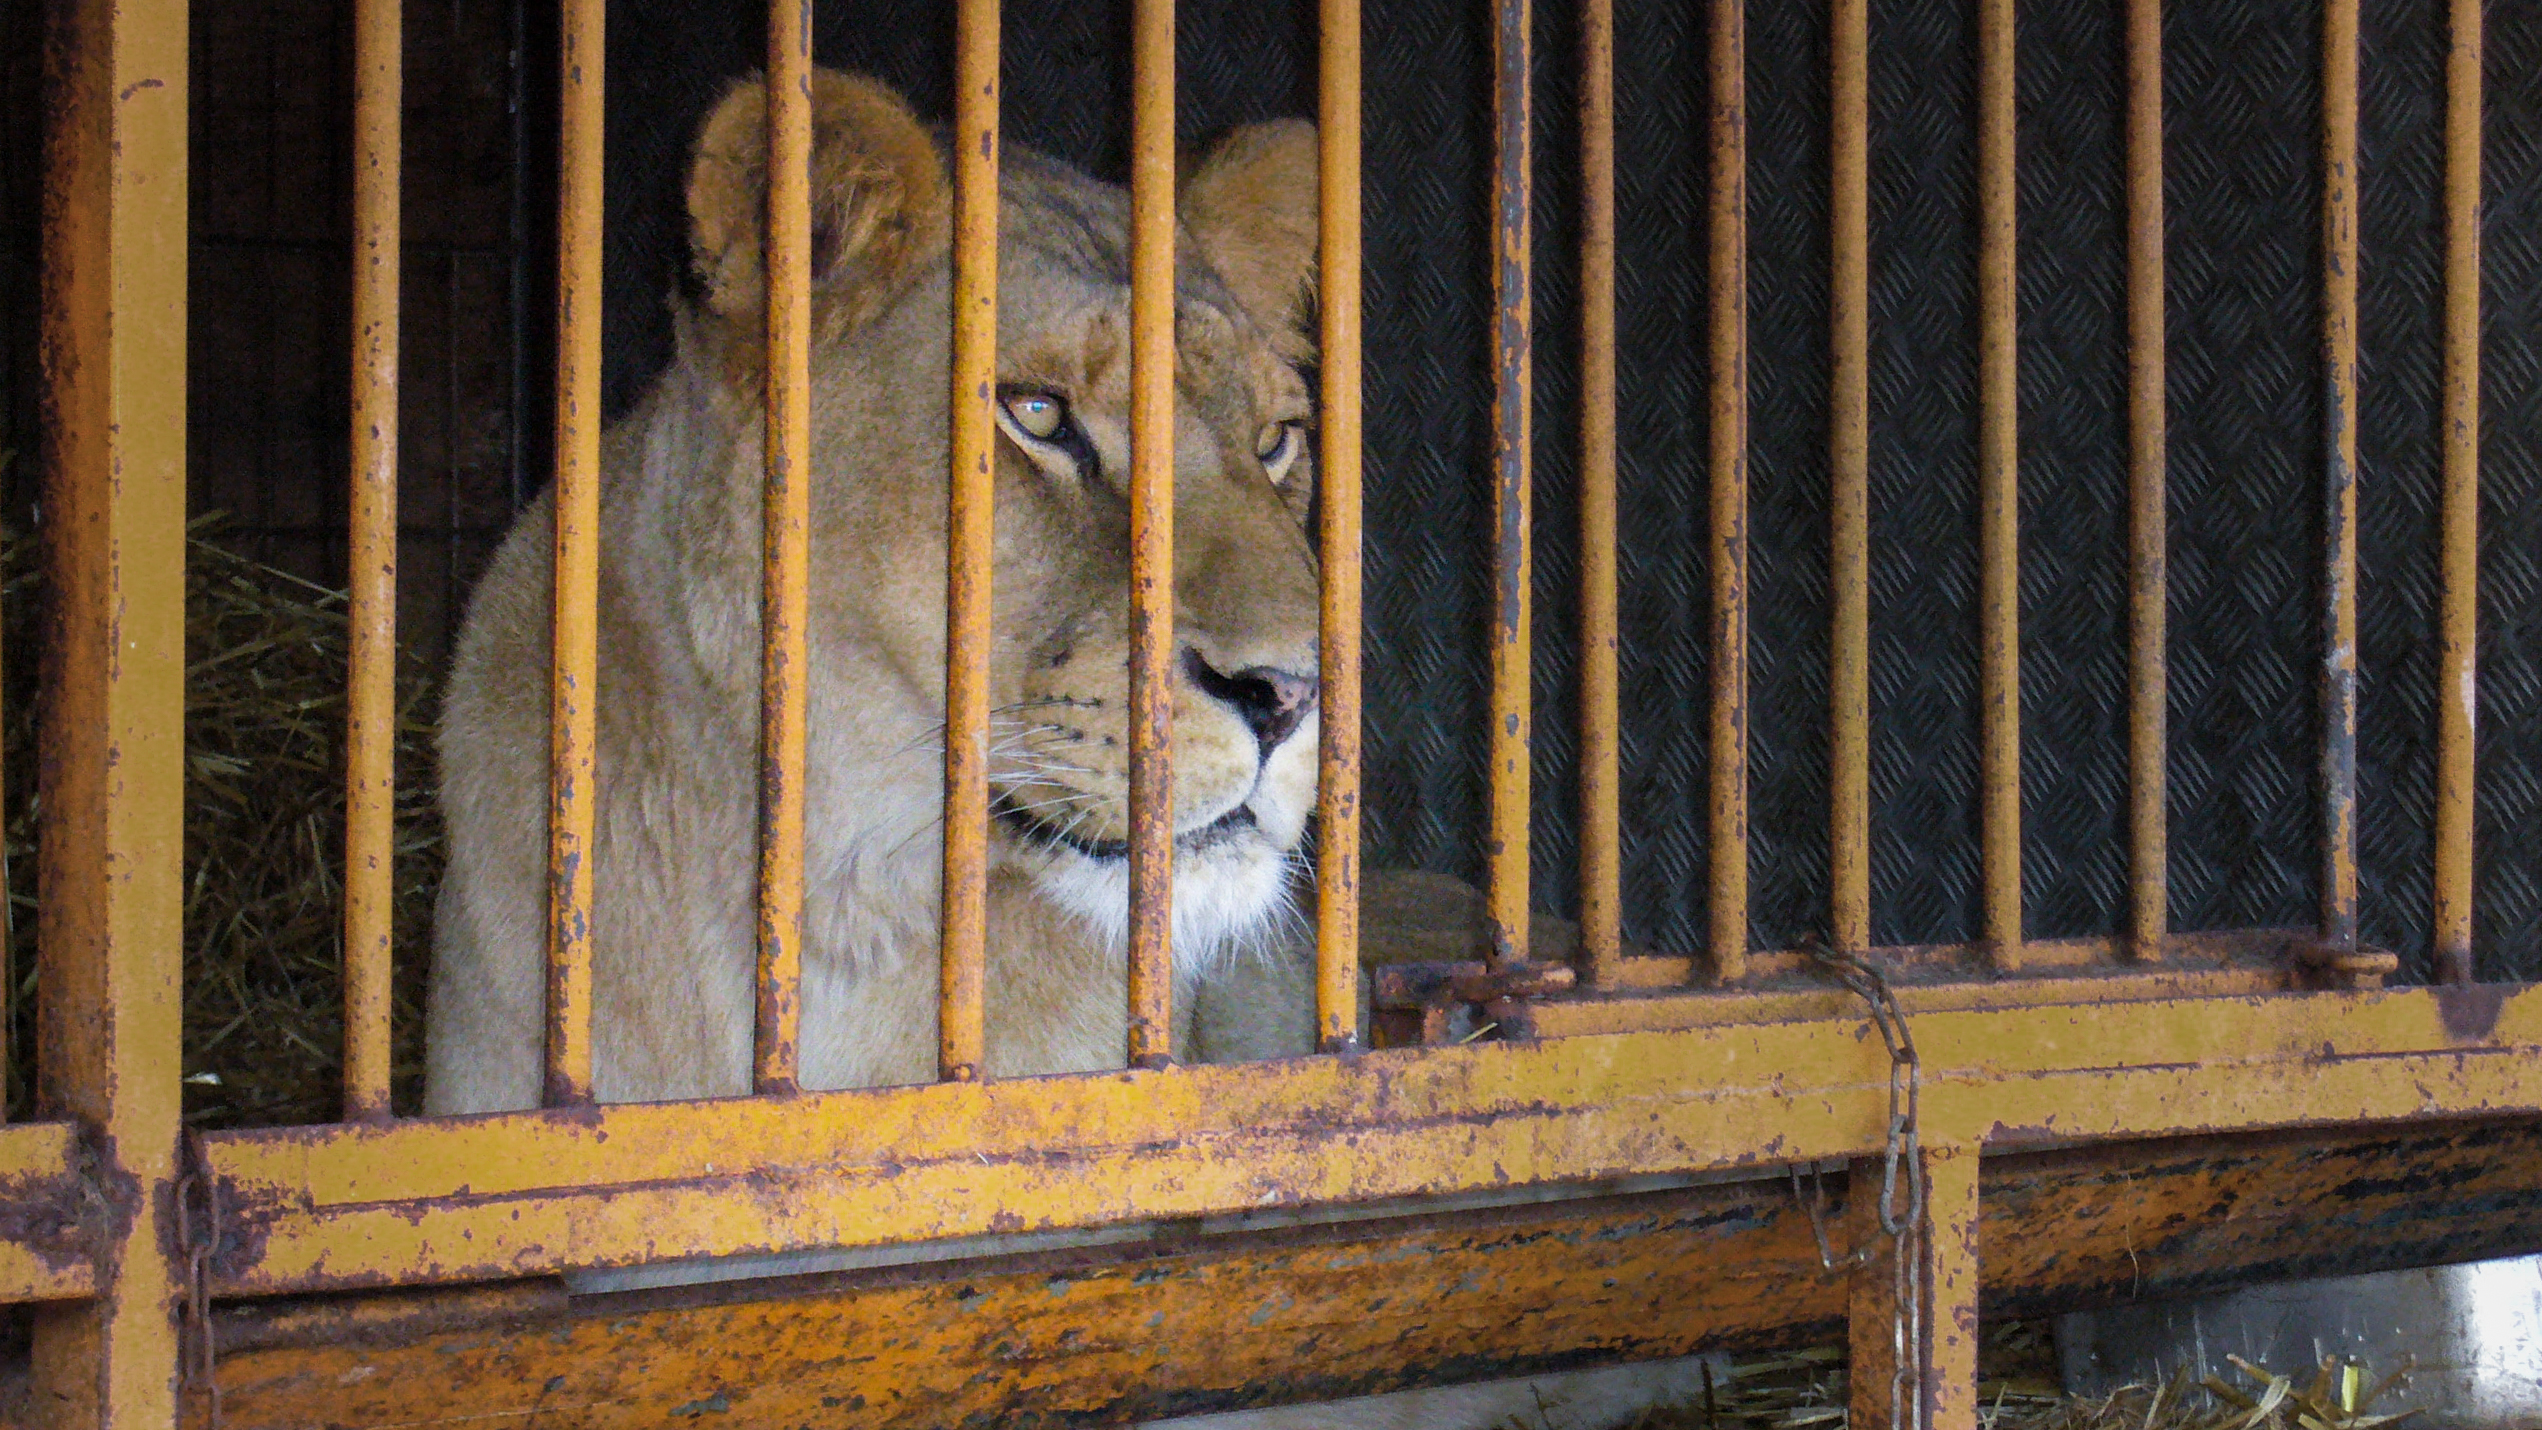 FRANCE BANS THE USE OF WILD ANIMALS IN TRAVELLING CIRCUSES